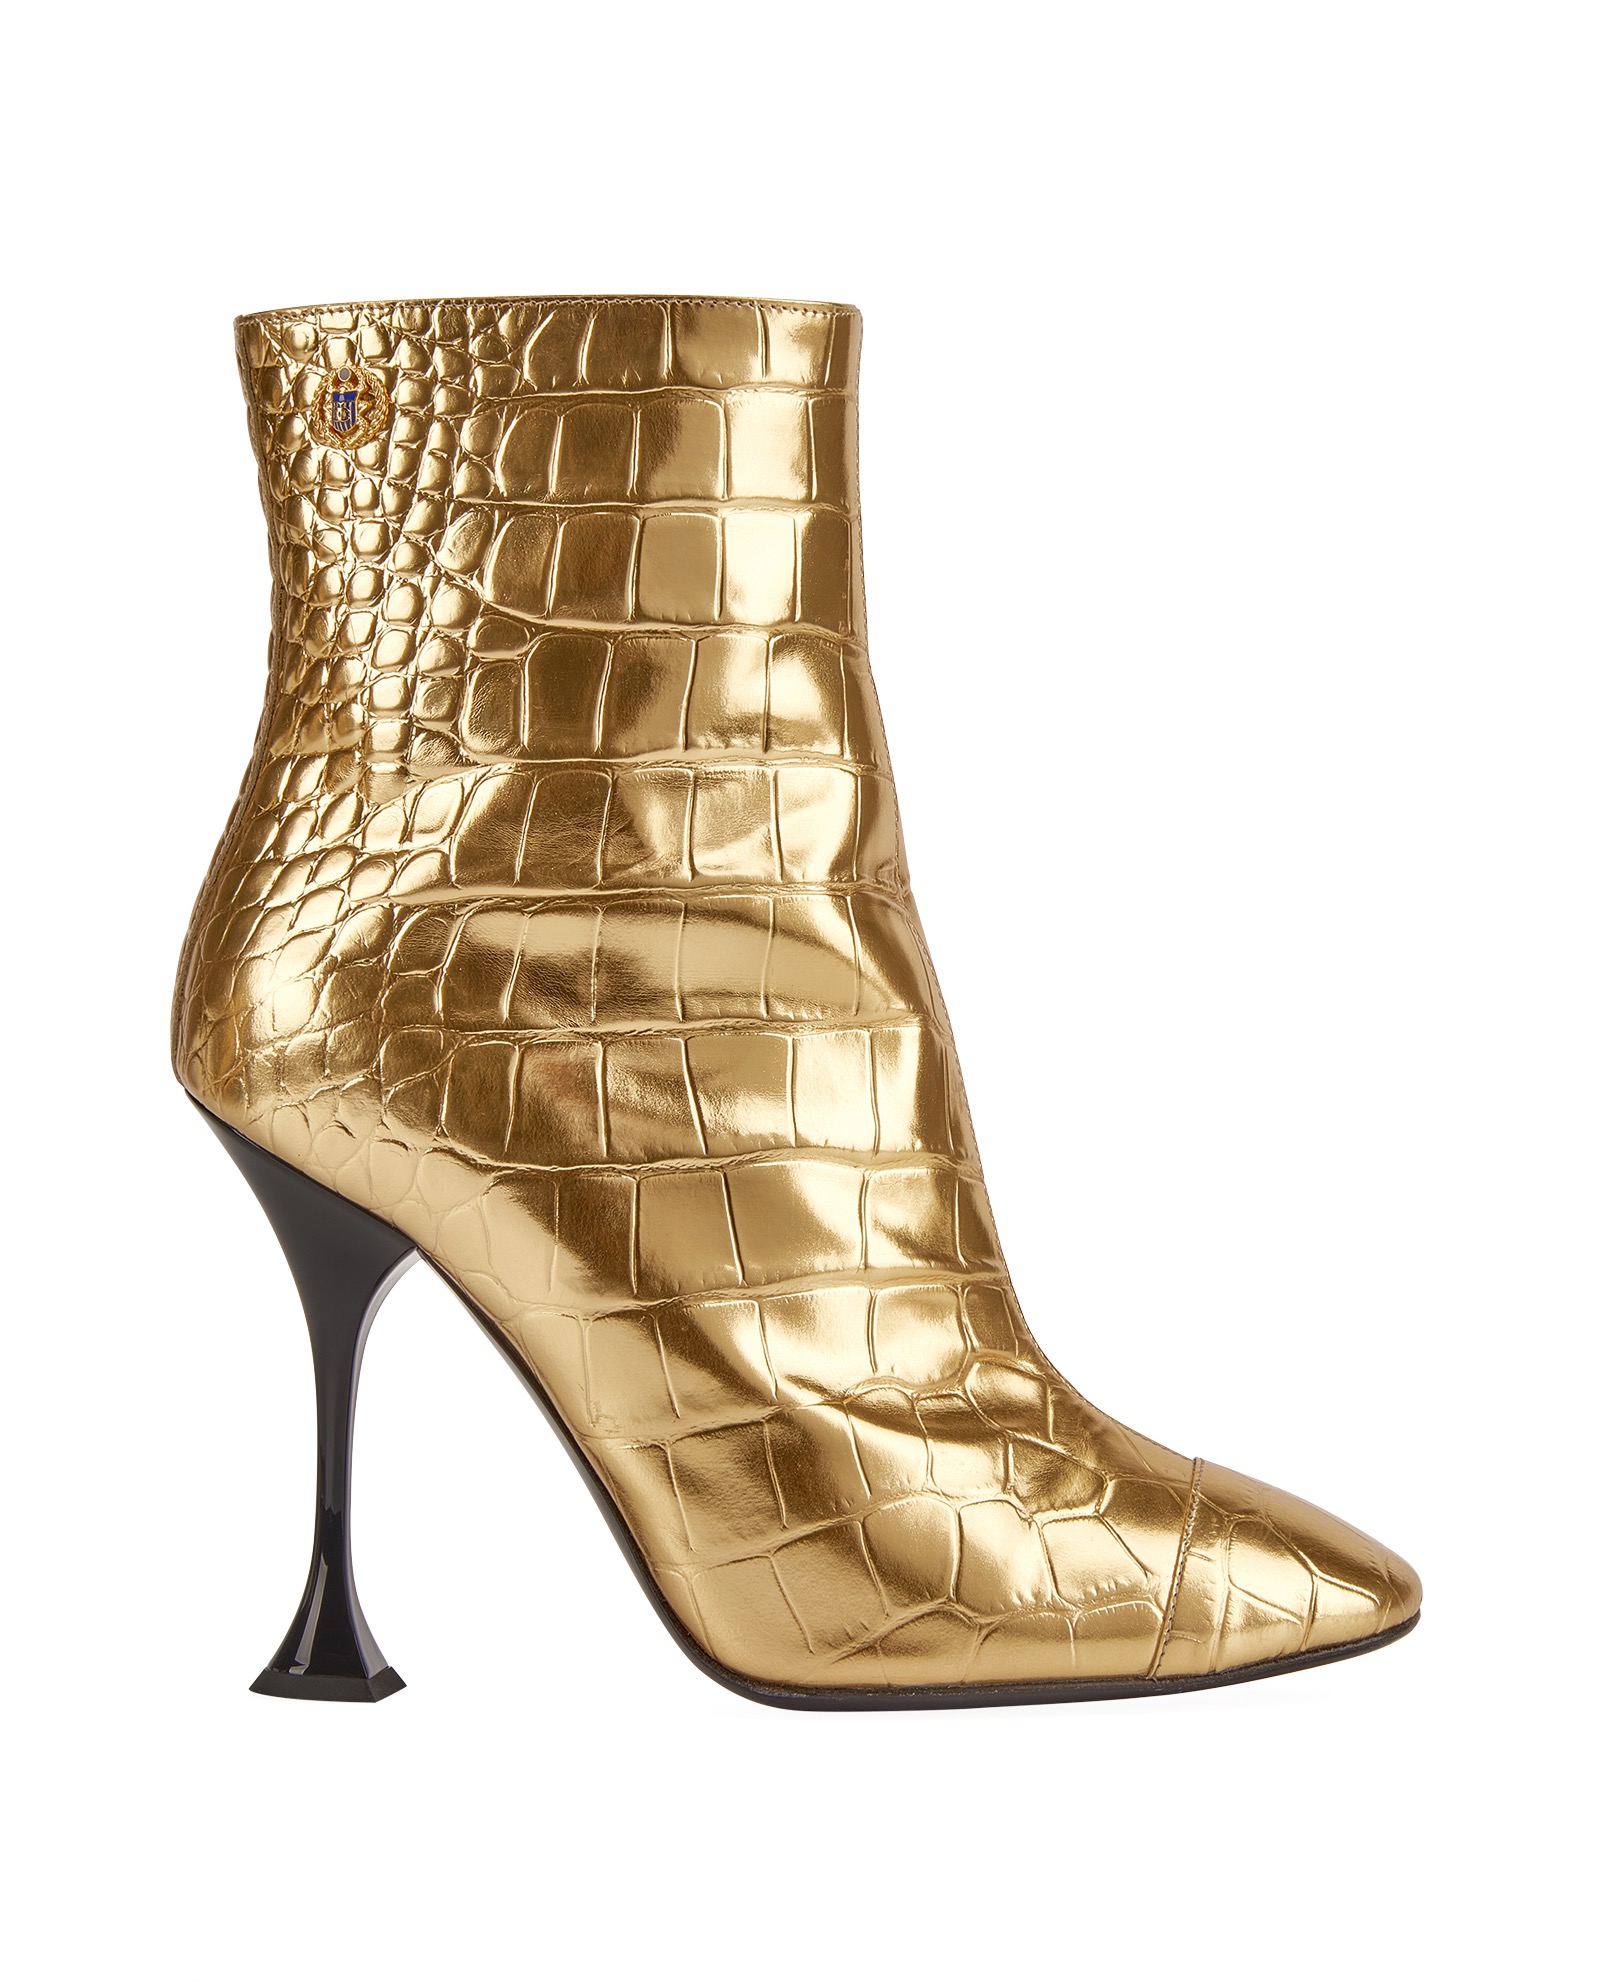 Chanel Crocodile Embossed Ankle Boots, Boots - Designer Exchange